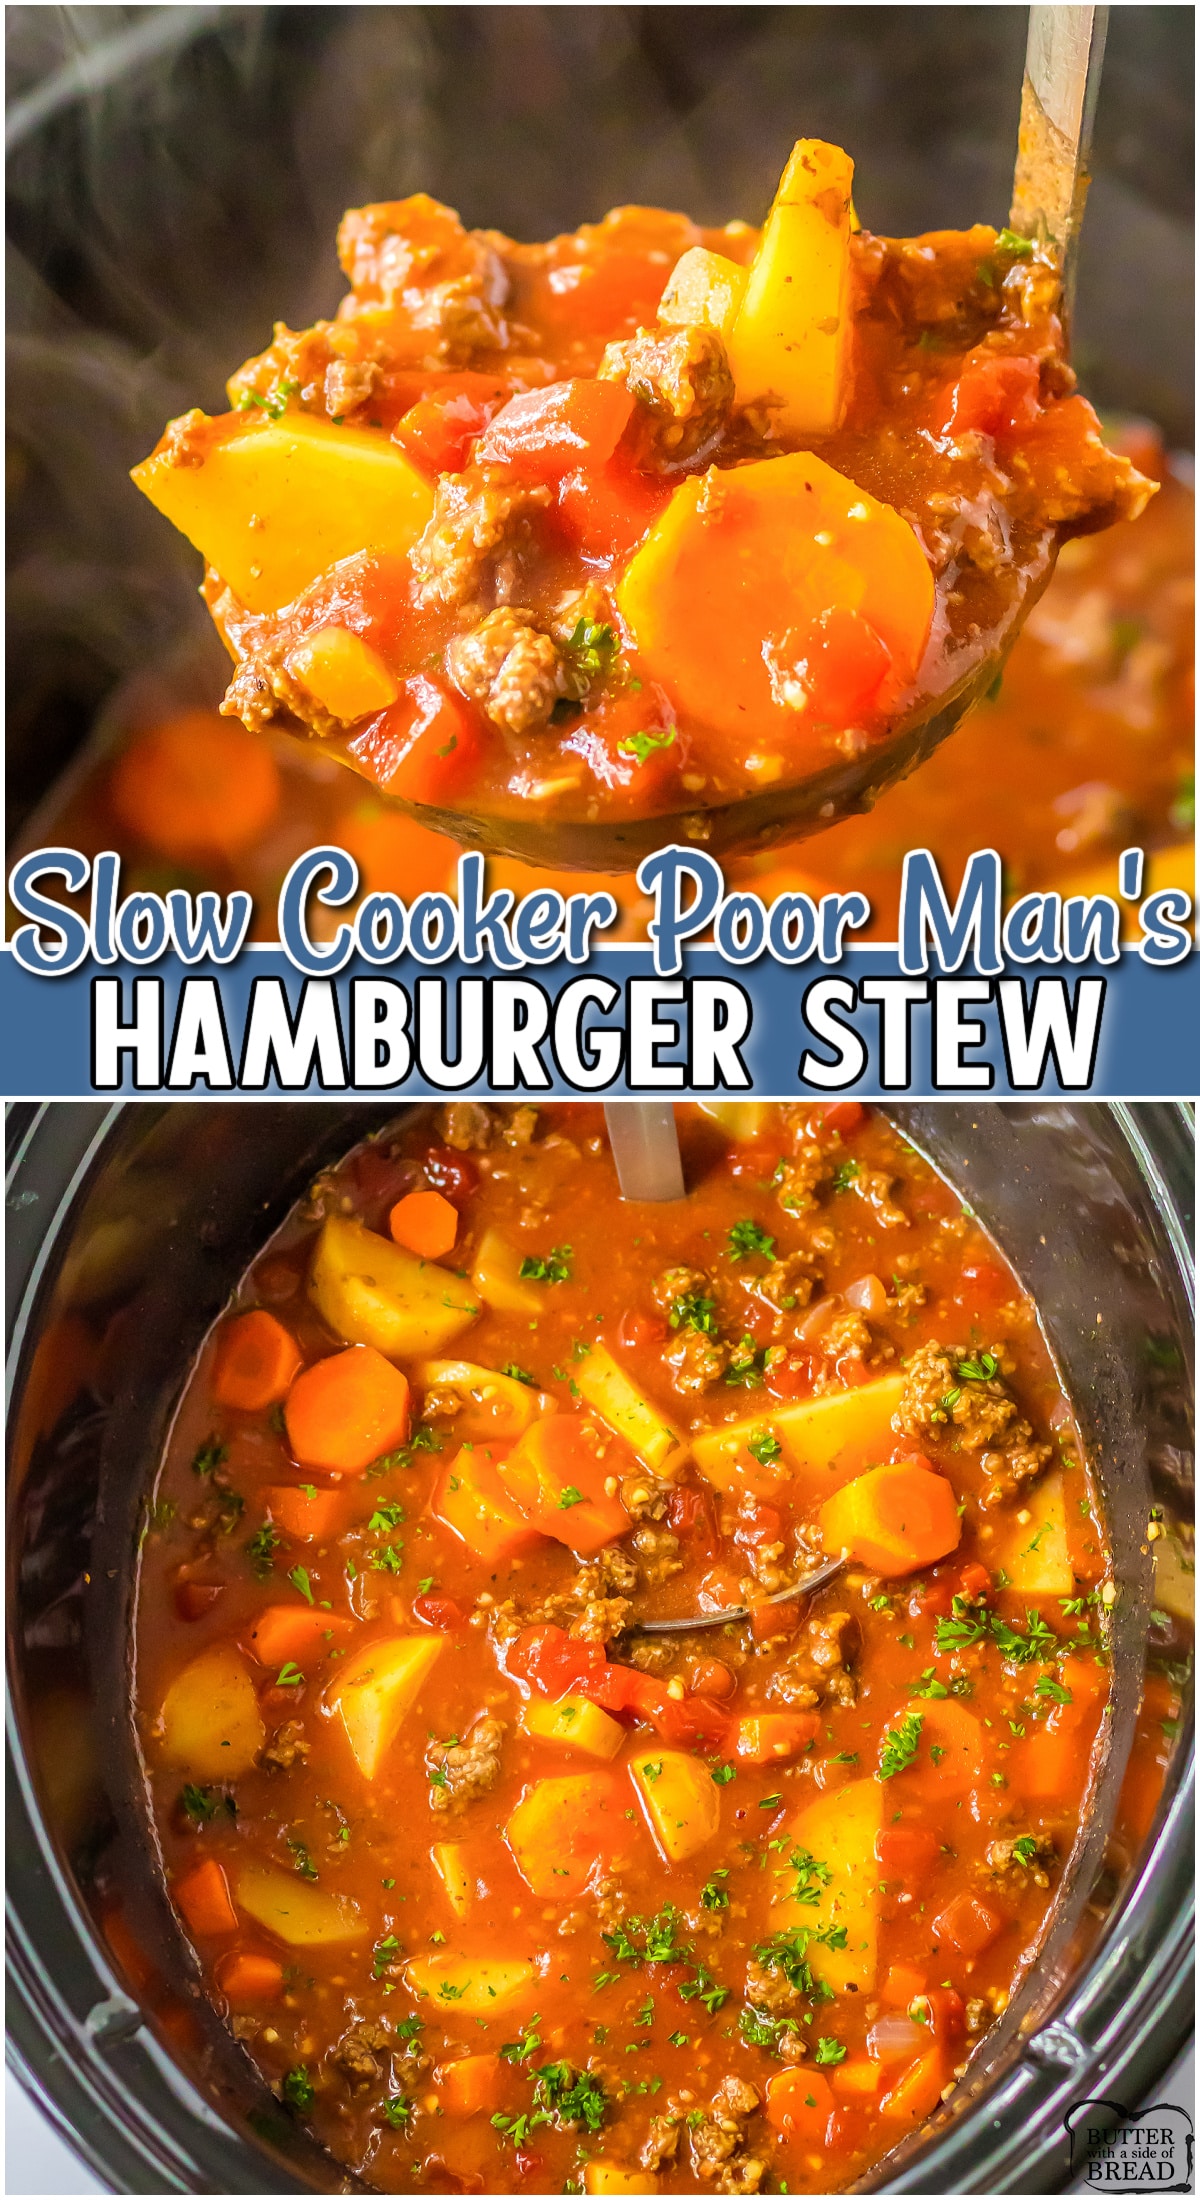 Slow Cooker Poor Man's Hamburger Stew is a hearty, delicious stew made with simple ingredients like ground beef, onions & potatoes. Comforting dinner perfect for cold nights!